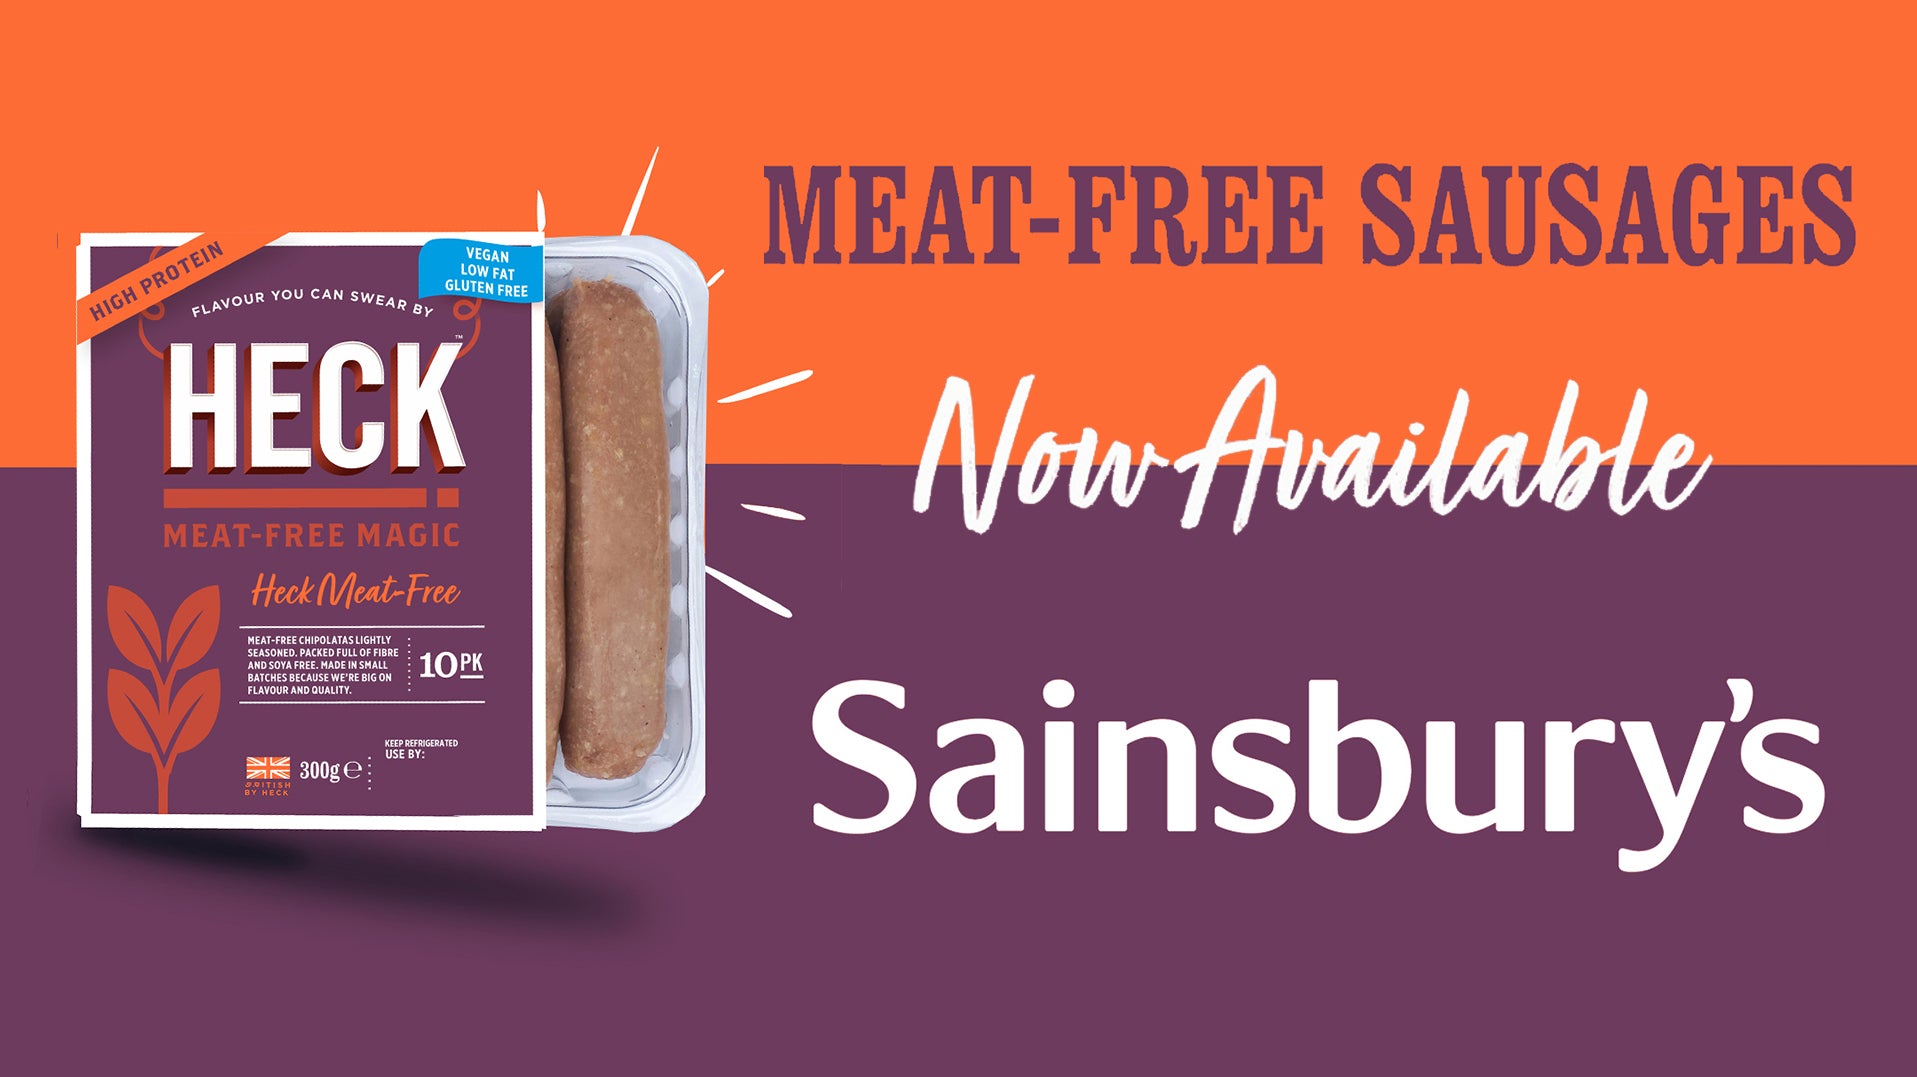 Buy HECK Meat-Free Sausages In Sainsbury’s Now!